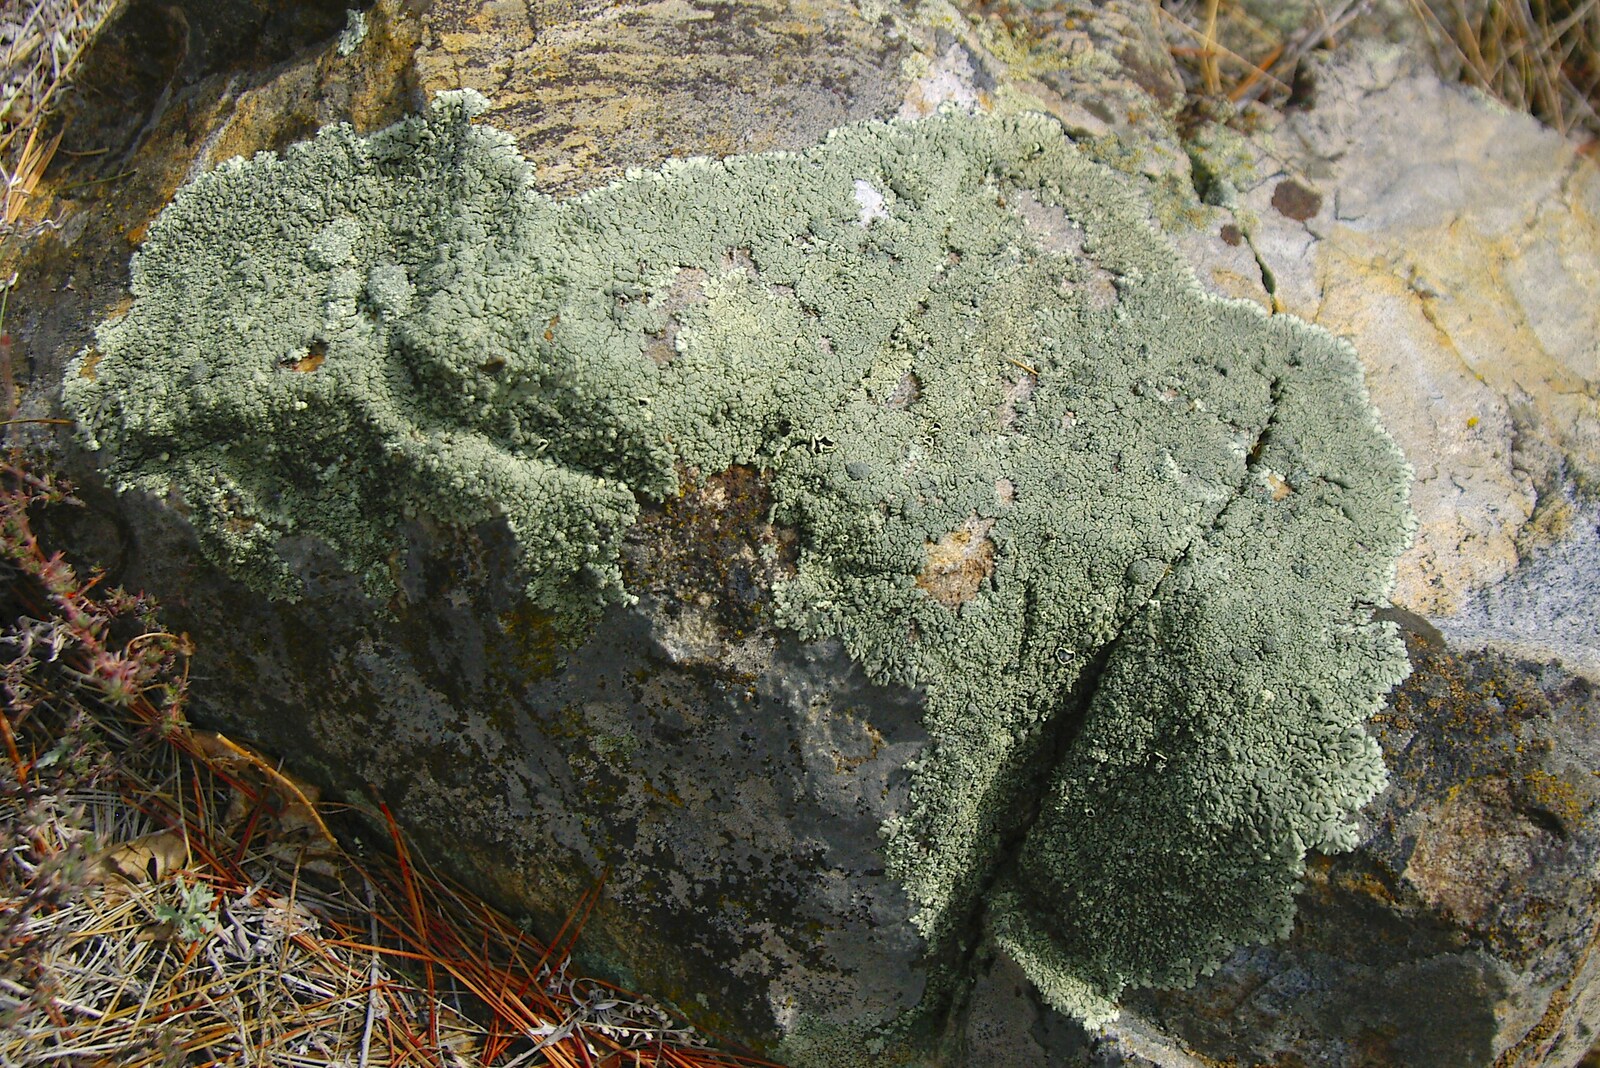 A sheet of pure green lichen from California Snow: San Bernadino State Forest, California, US - 26th March 2006